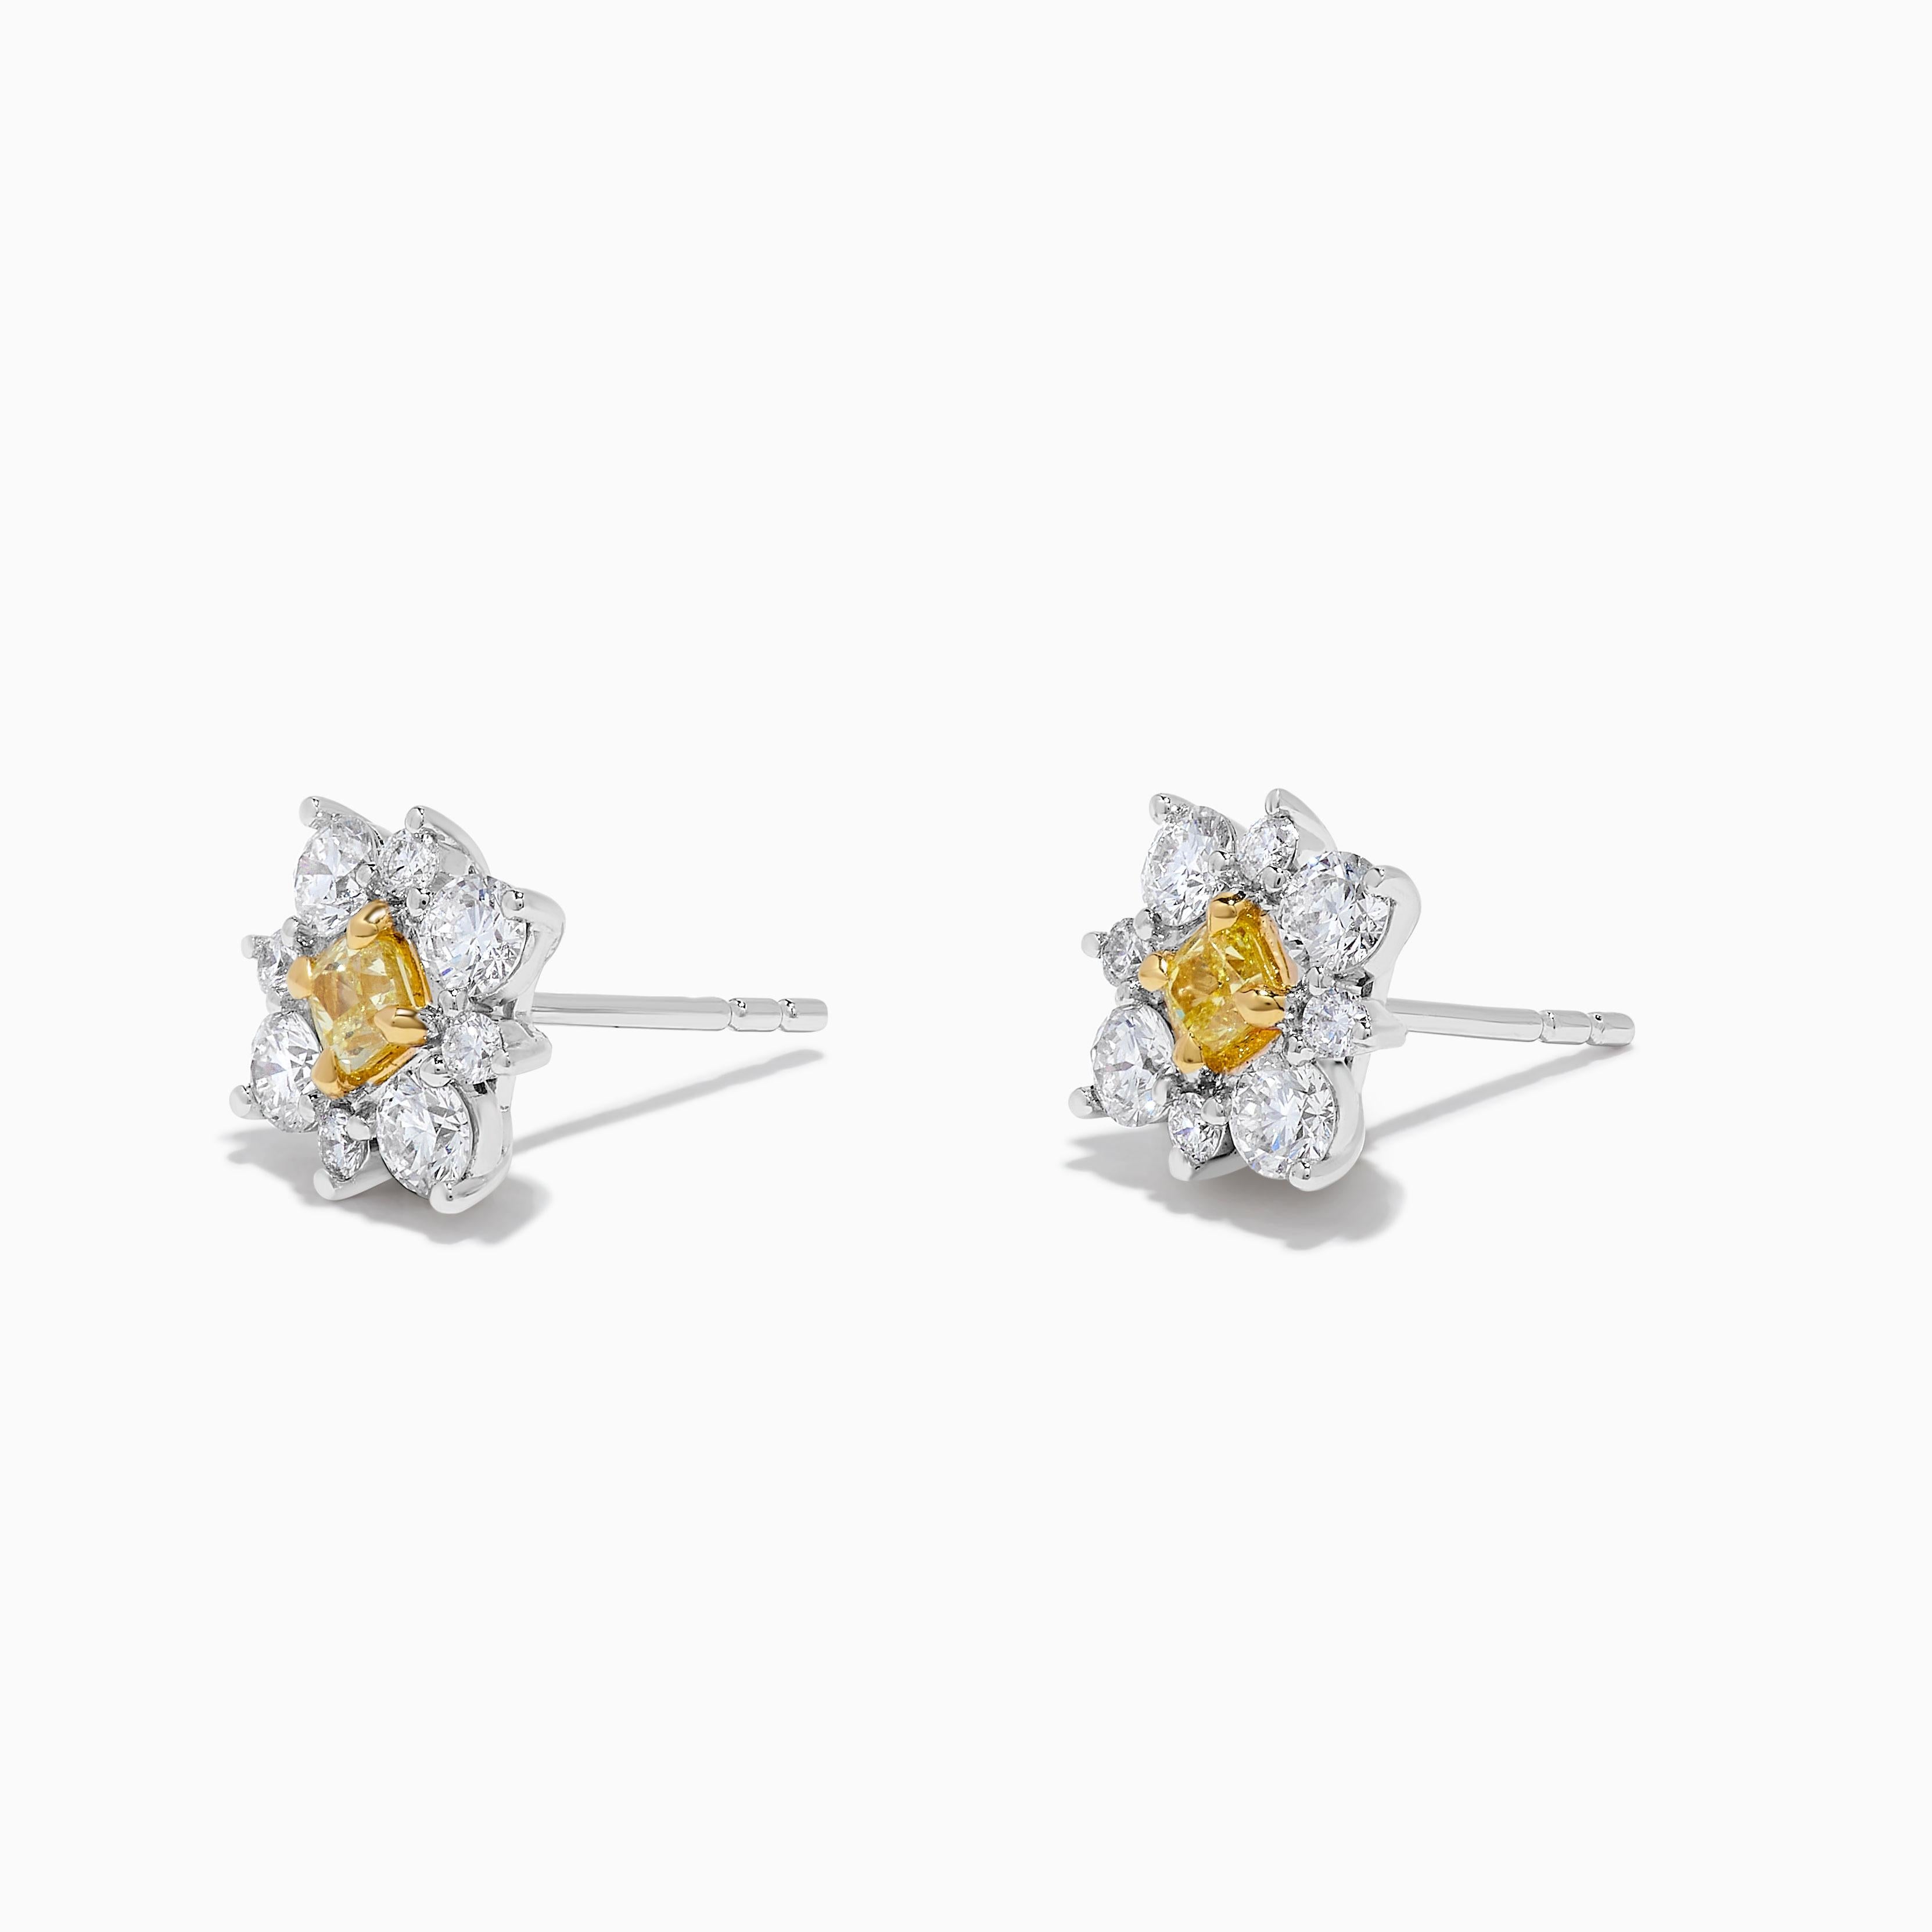 Cushion Cut Natural Yellow Cushion and White Diamond 1.29 Carat TW Gold Stud Earrings For Sale